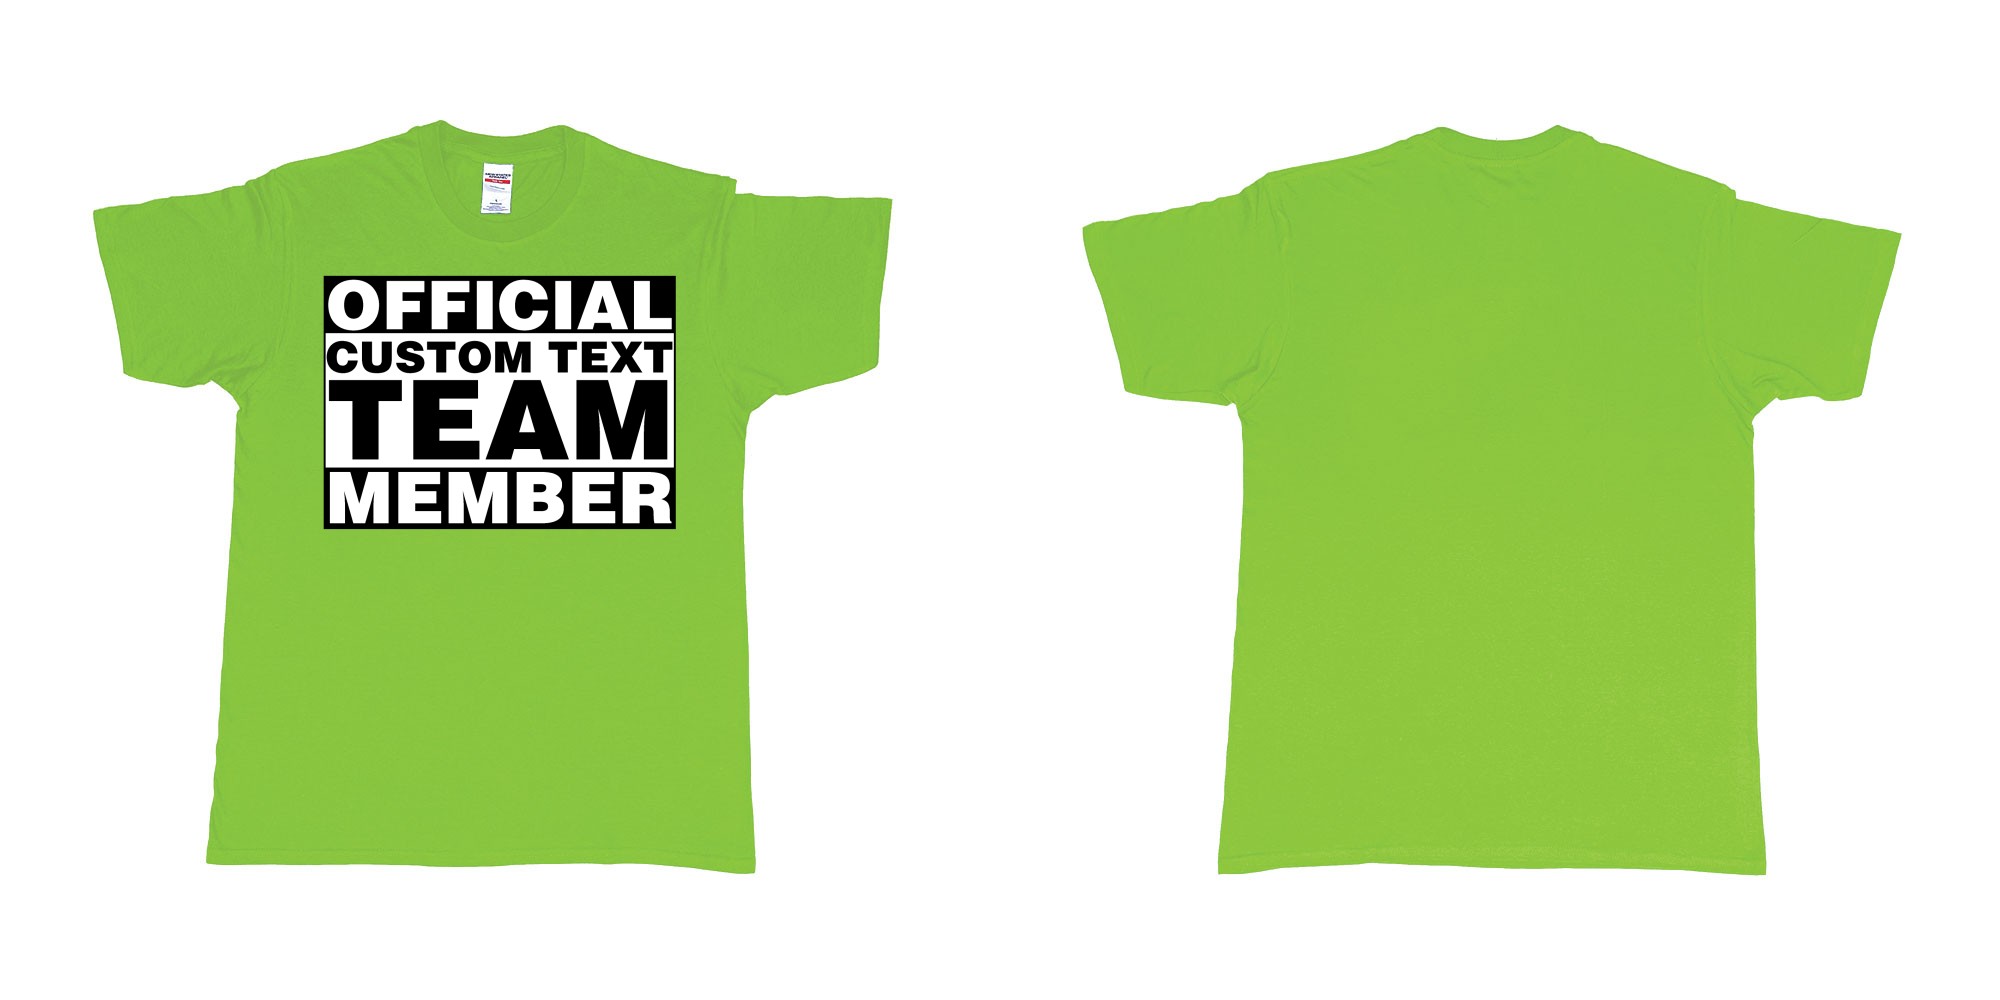 Custom tshirt design official custom text team member in fabric color lime choice your own text made in Bali by The Pirate Way